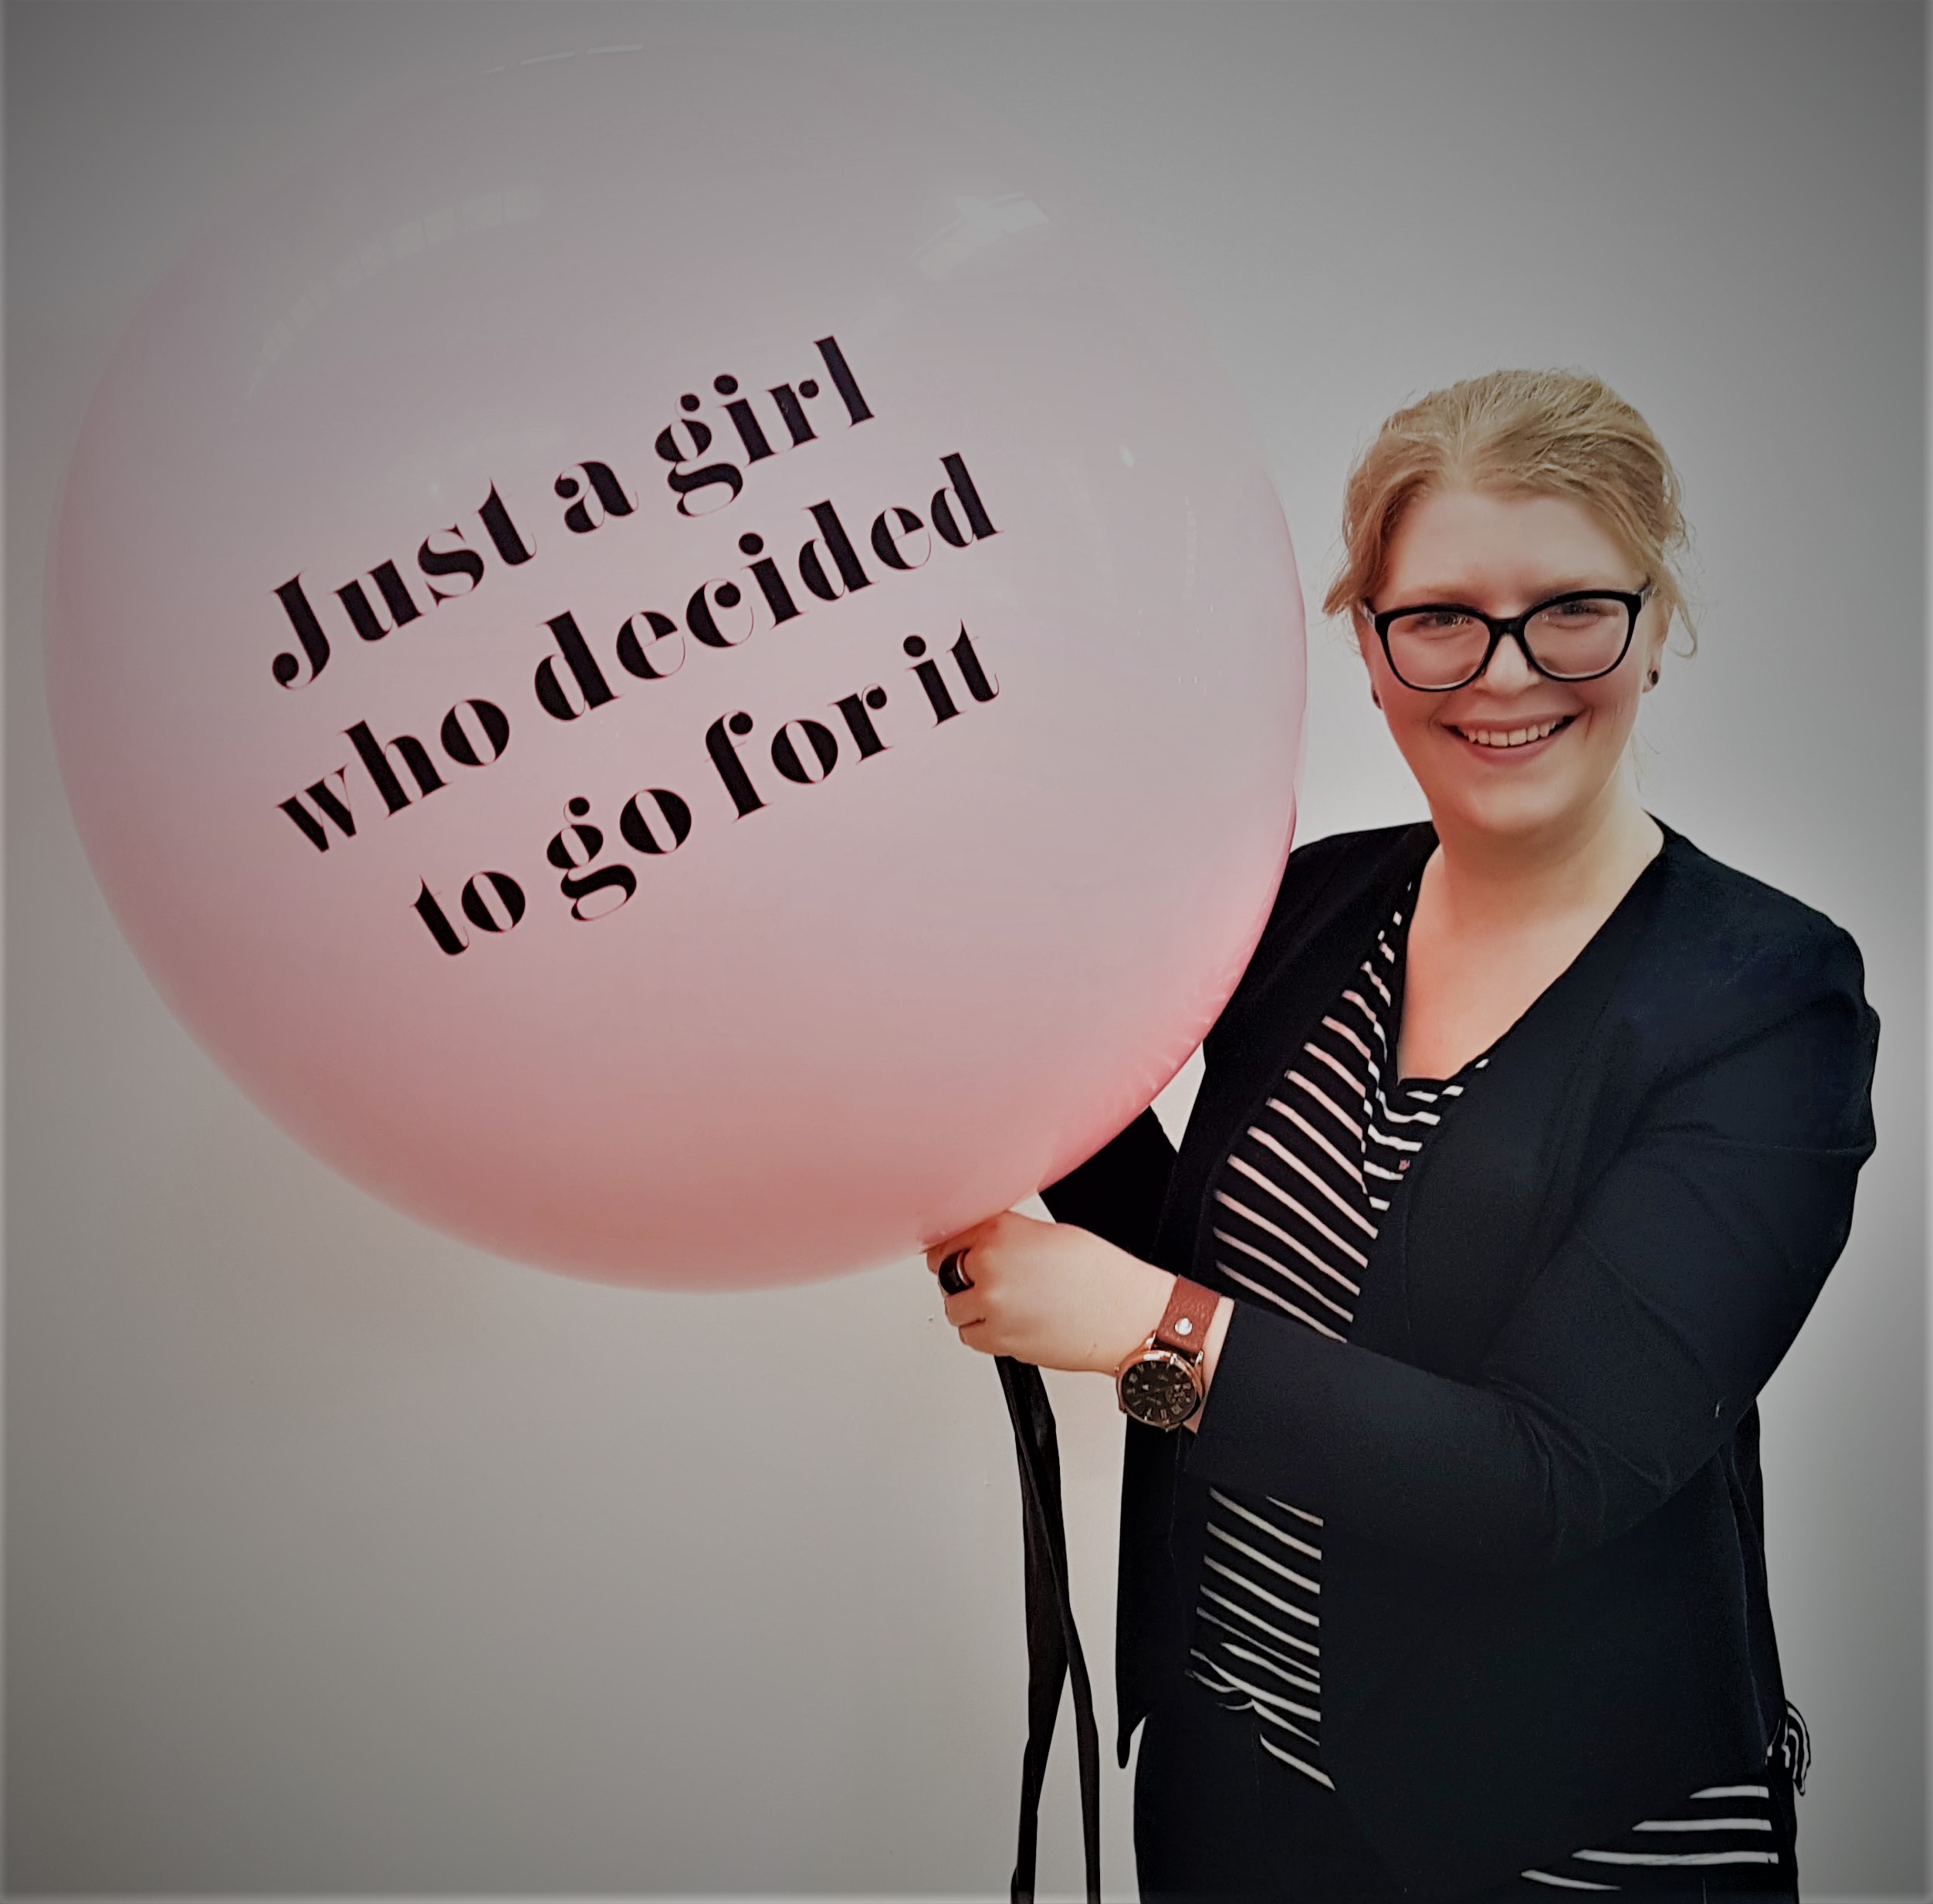 "Libby standing to the right of a pink balloon with the words "Just a girl who decided to go for it" written on it."